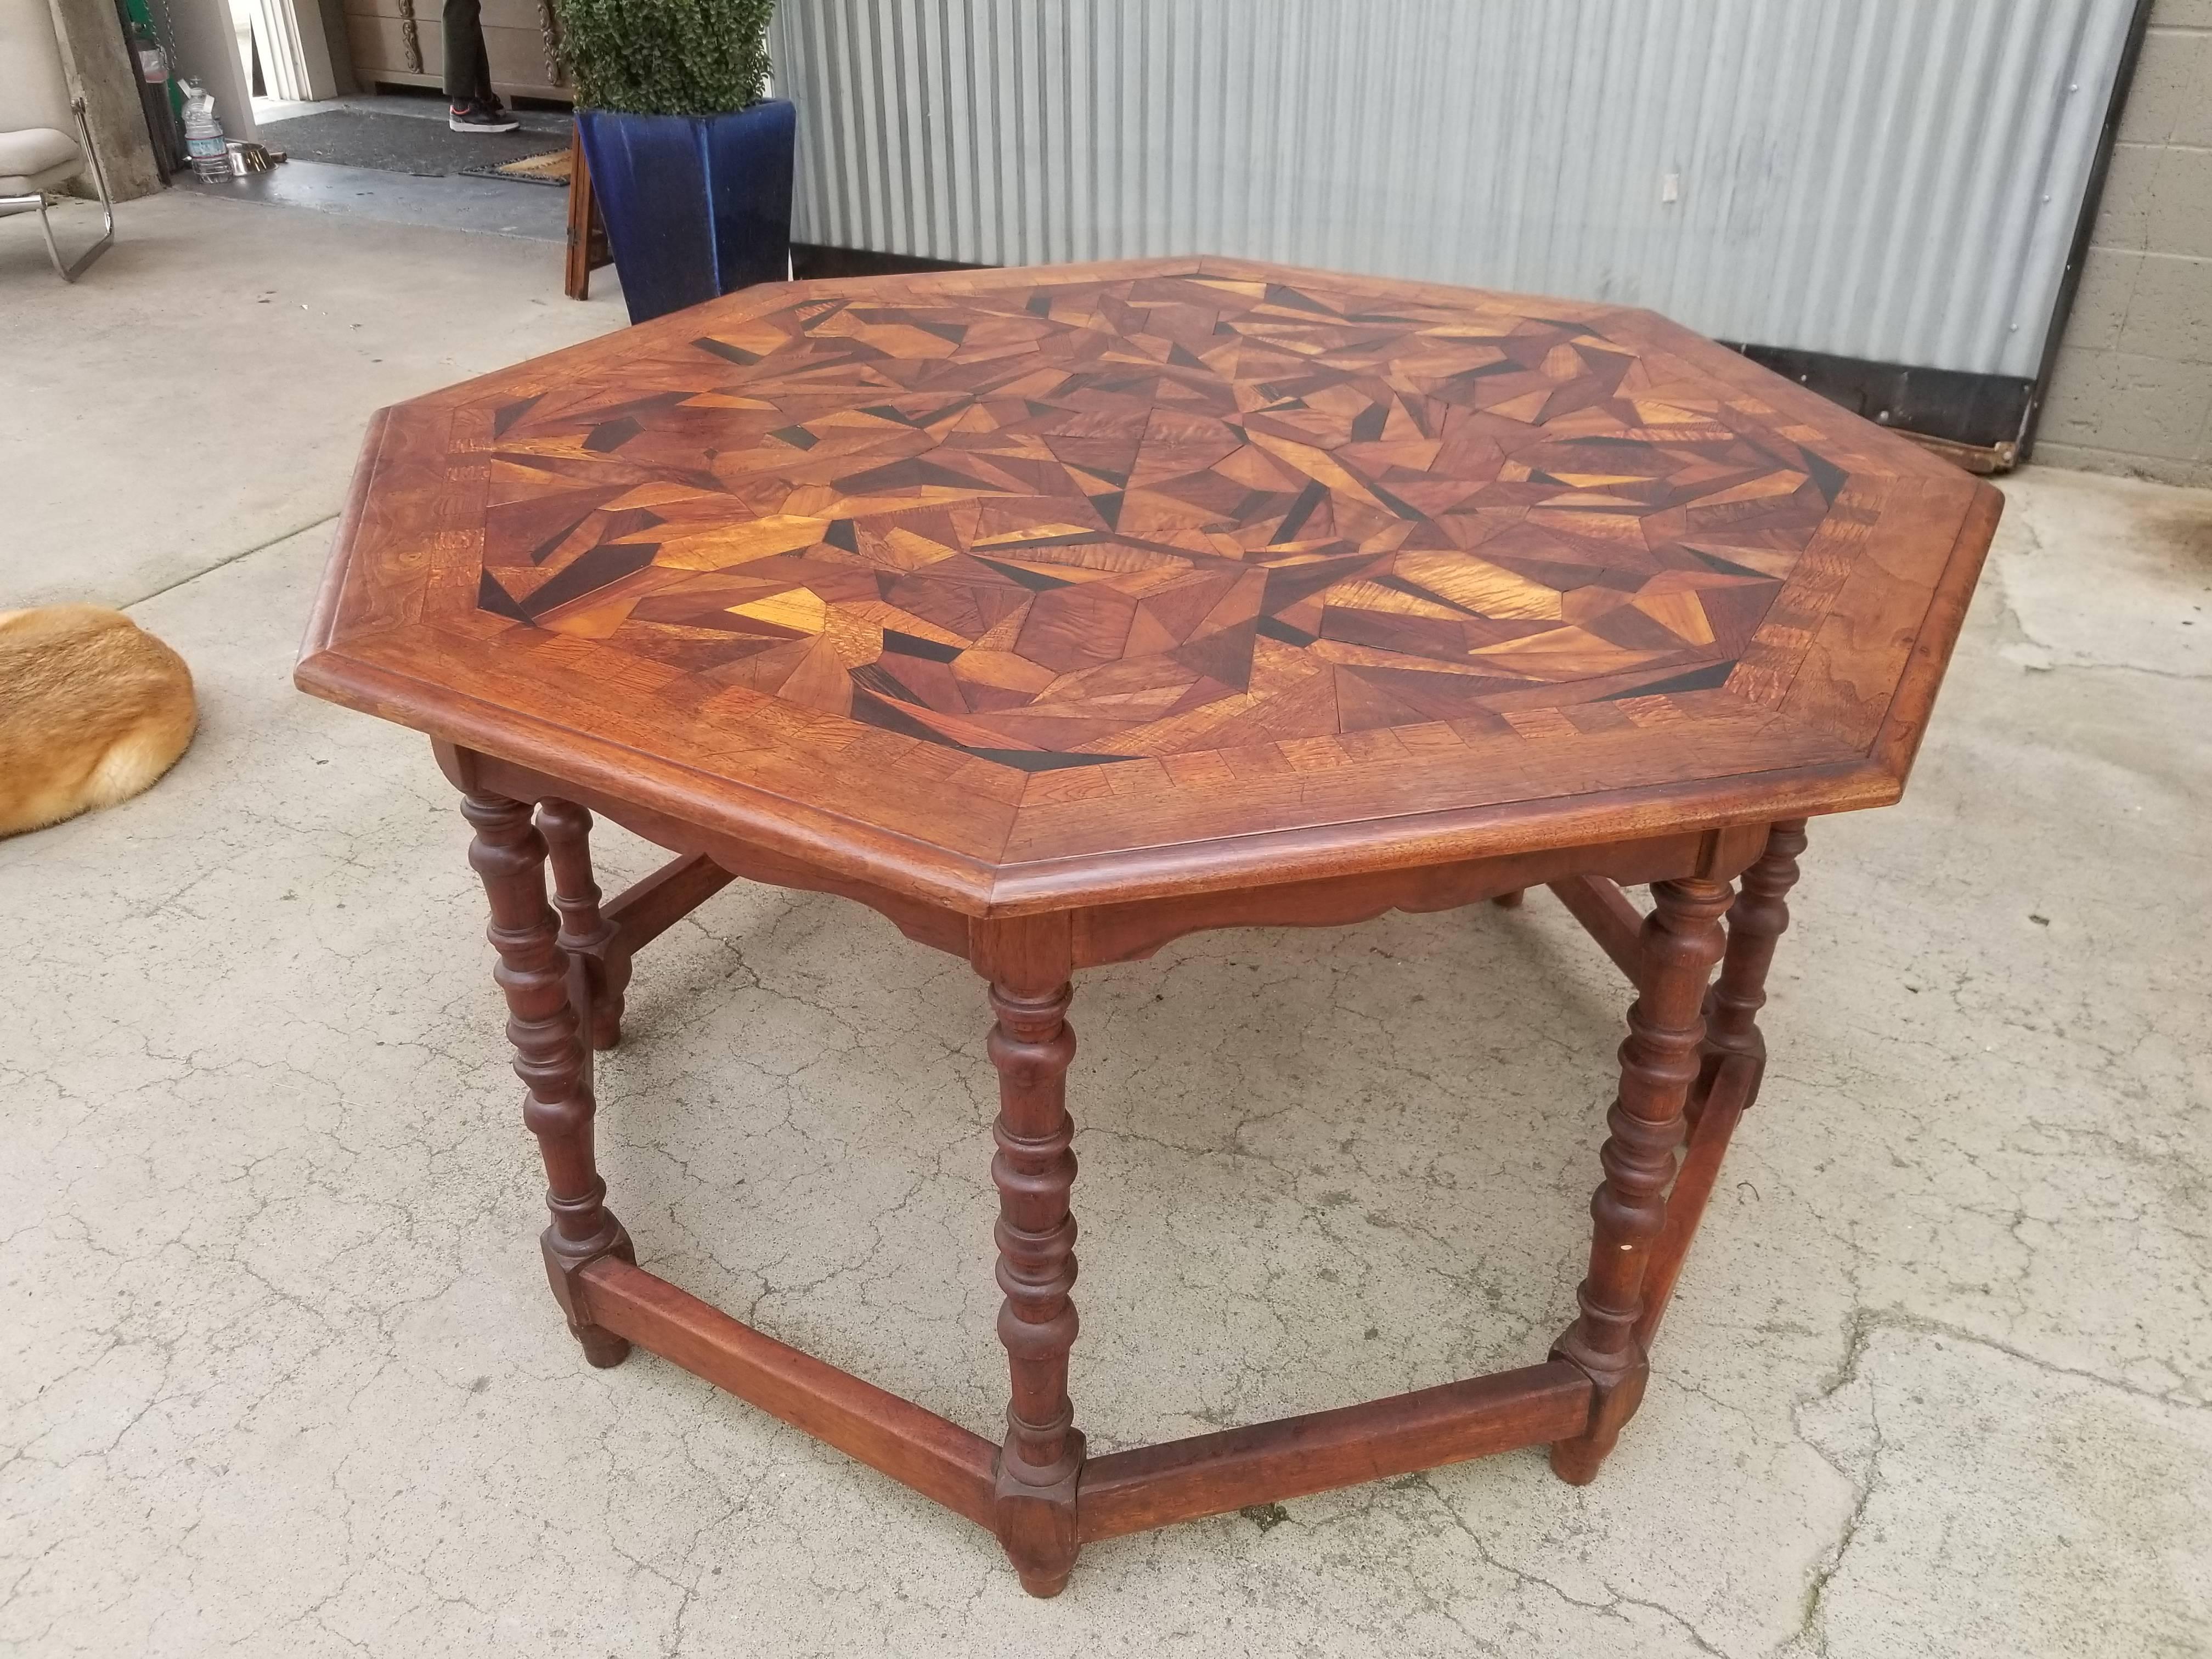 Unique, large-scale octagonal centre or entry table with fantastic geometric specimen wood inlaid top on a solid walnut base. Beautiful, warm glow to patina throughout entire table. Appears to be a one-of-a-kind Folk Art creation. Dramatic visual as